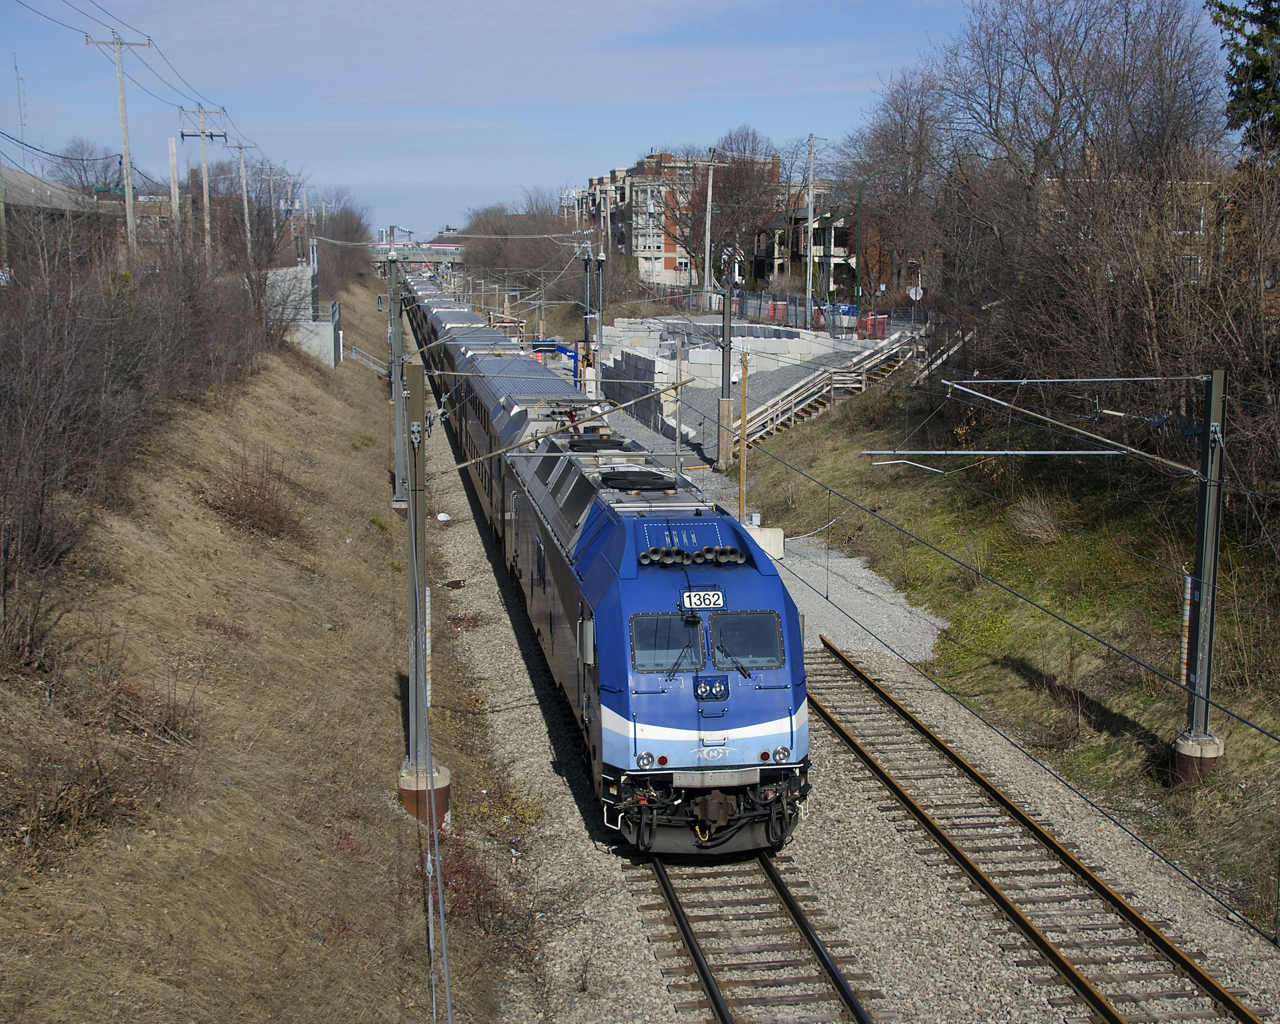 AMT 1362 is on the rear of a deadhead move that is passing through the combined stations of Canora and Mont-Royal. This line was double-tracked until the summer of 2018 when work started on the REM light rail project. This work necessitated the closure of the existing Canora and Mont-Royal stations, with a new one located roughly halfway between the two stations. The track at right is not in use and has been paved over both north and south of there. This part of the Deux-Montagnes line was supposed to be closed for a number of years starting March 29th, but all work on the REM project has stopped for the time being and trains are still running here.